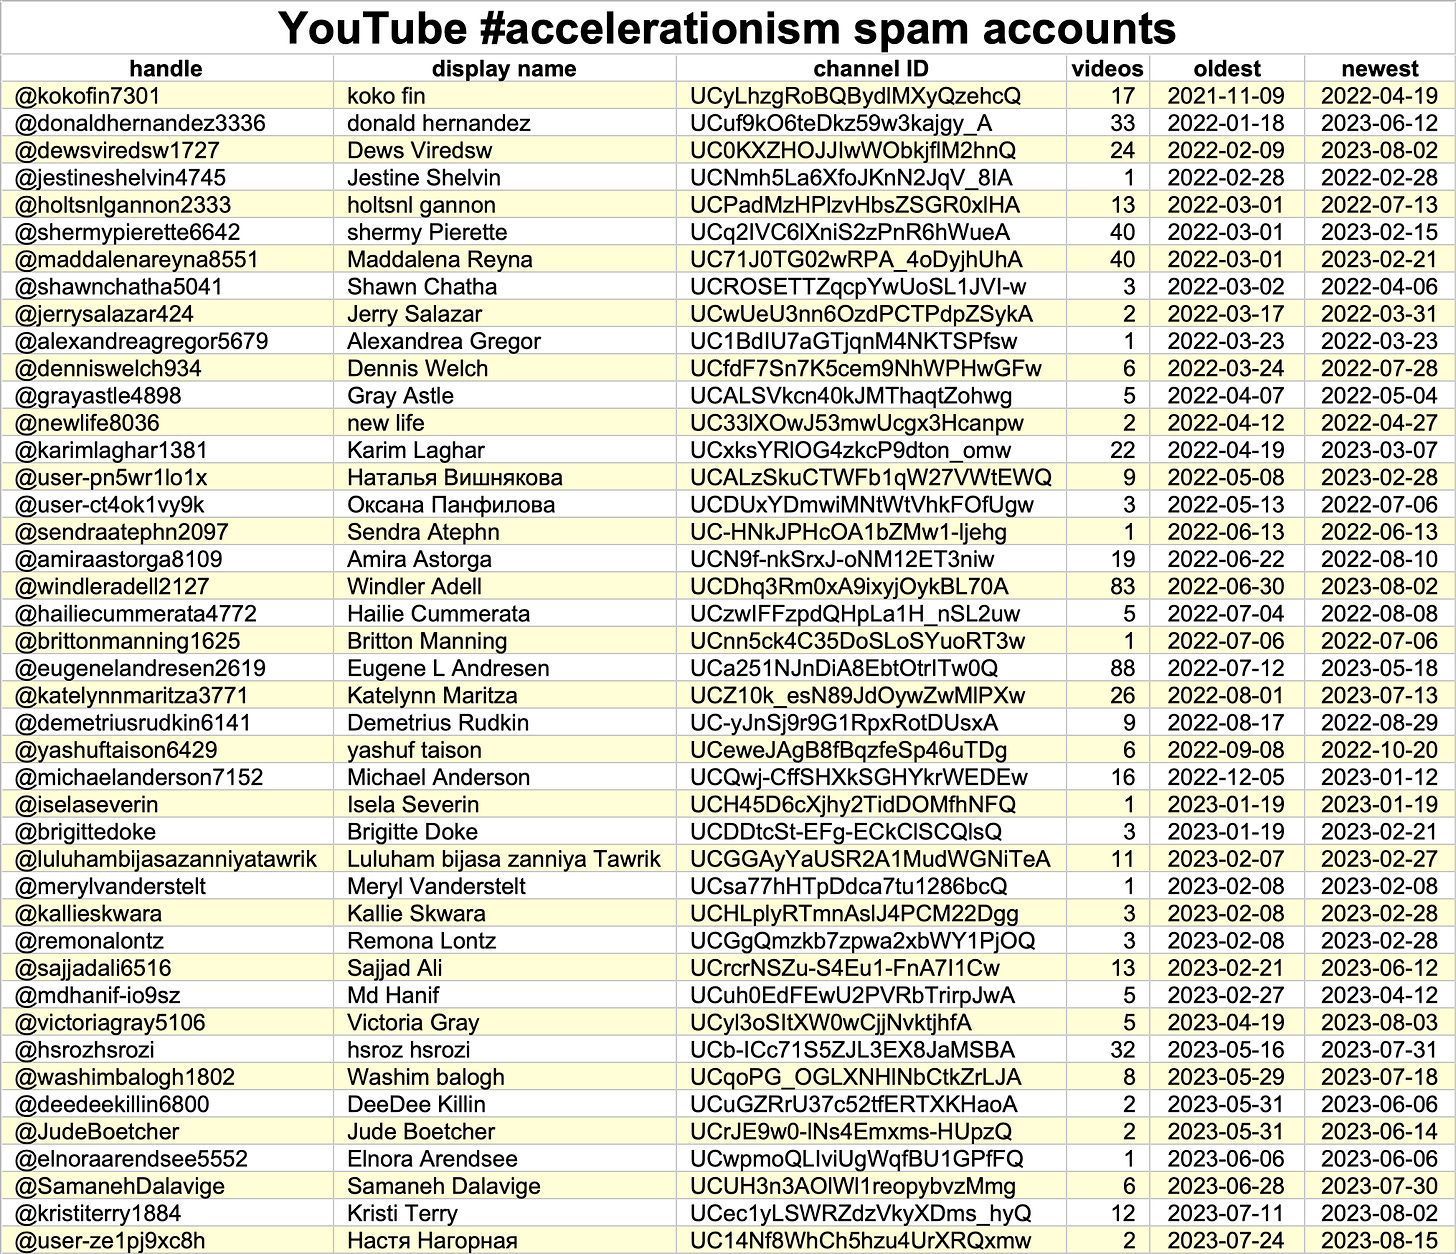 table of 43 YouTube #accelerationism spam accounts